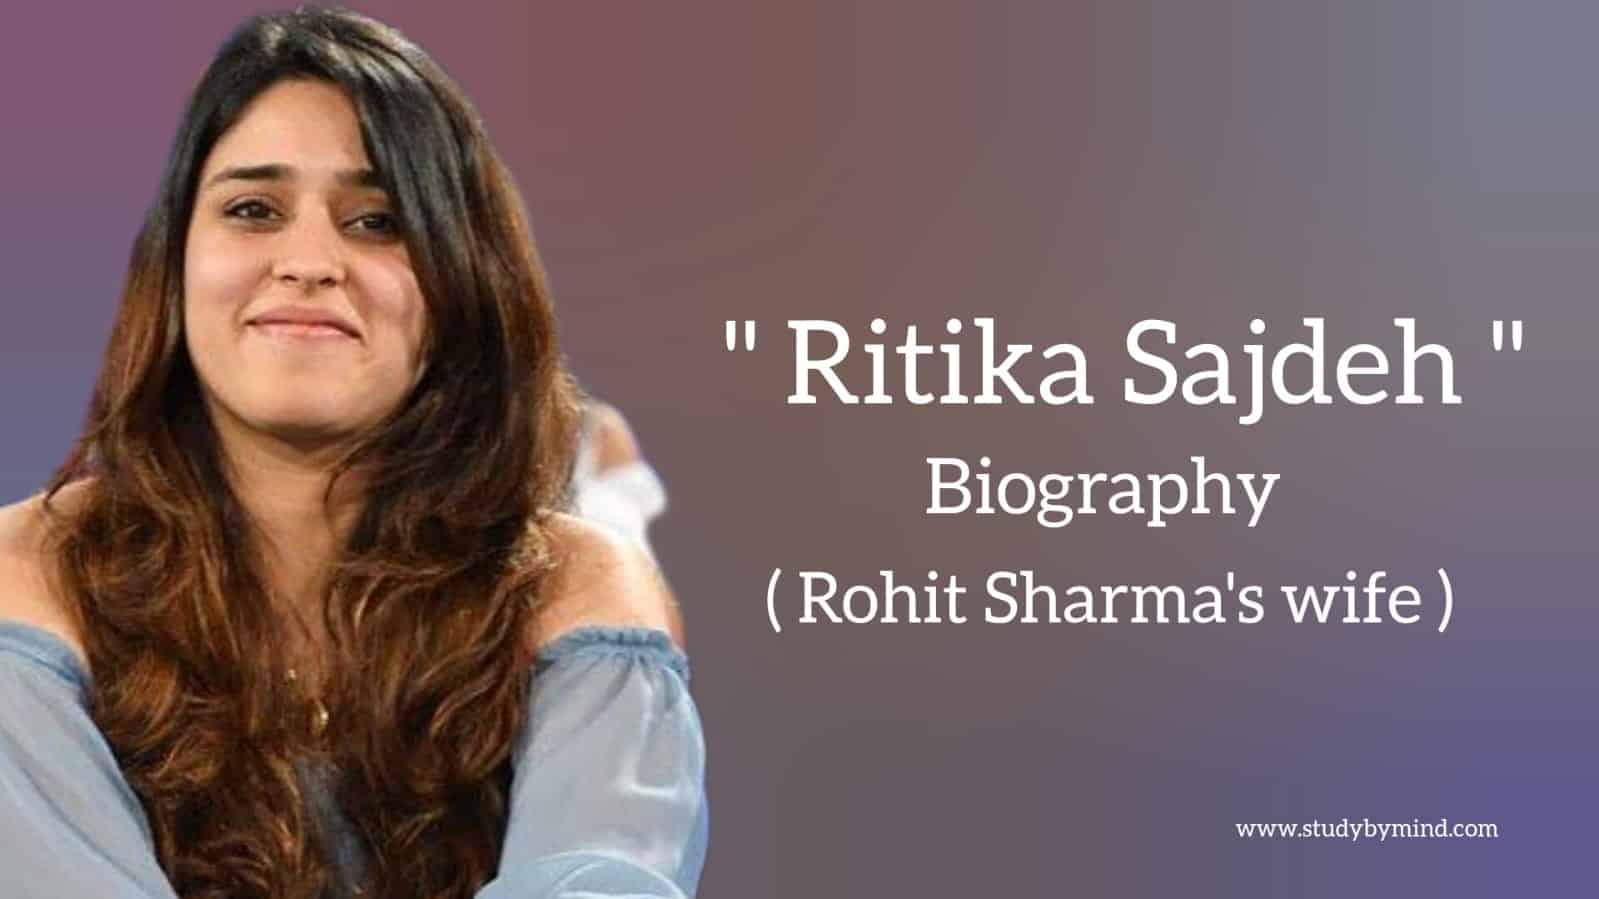 You are currently viewing Ritika sajdeh biography in english (Rohit Sharma’s Wife)